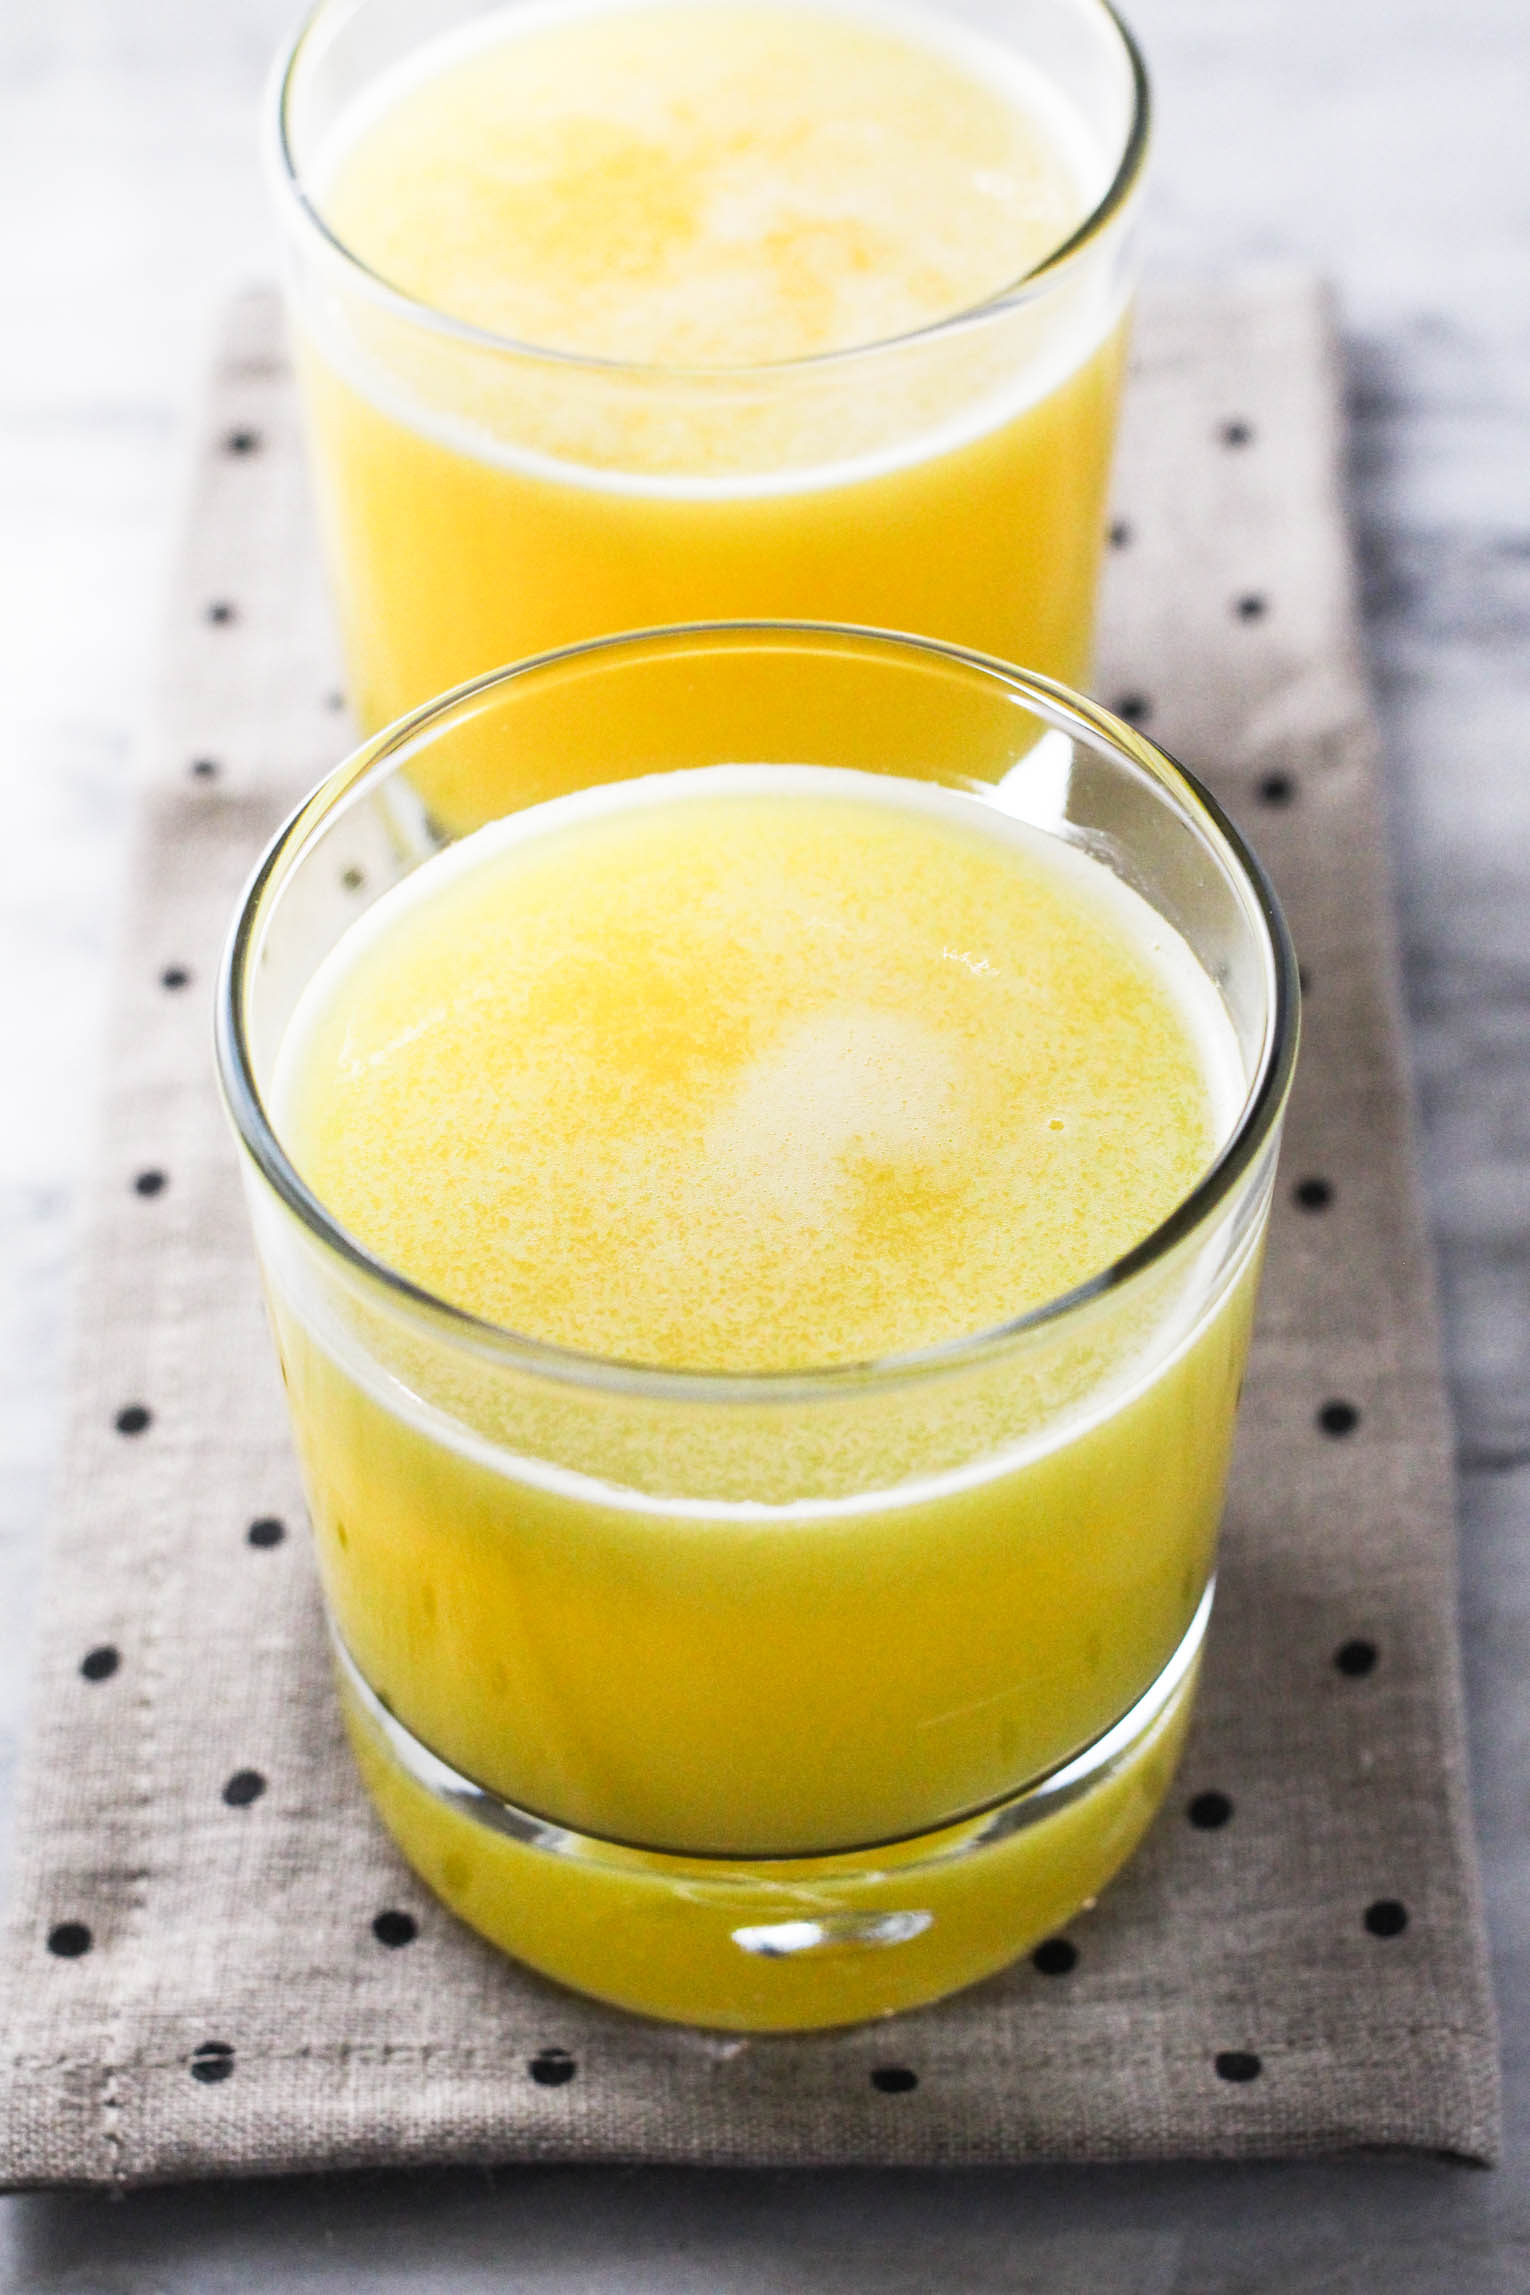 Two glasses of pineapple juice standing on a linen background.